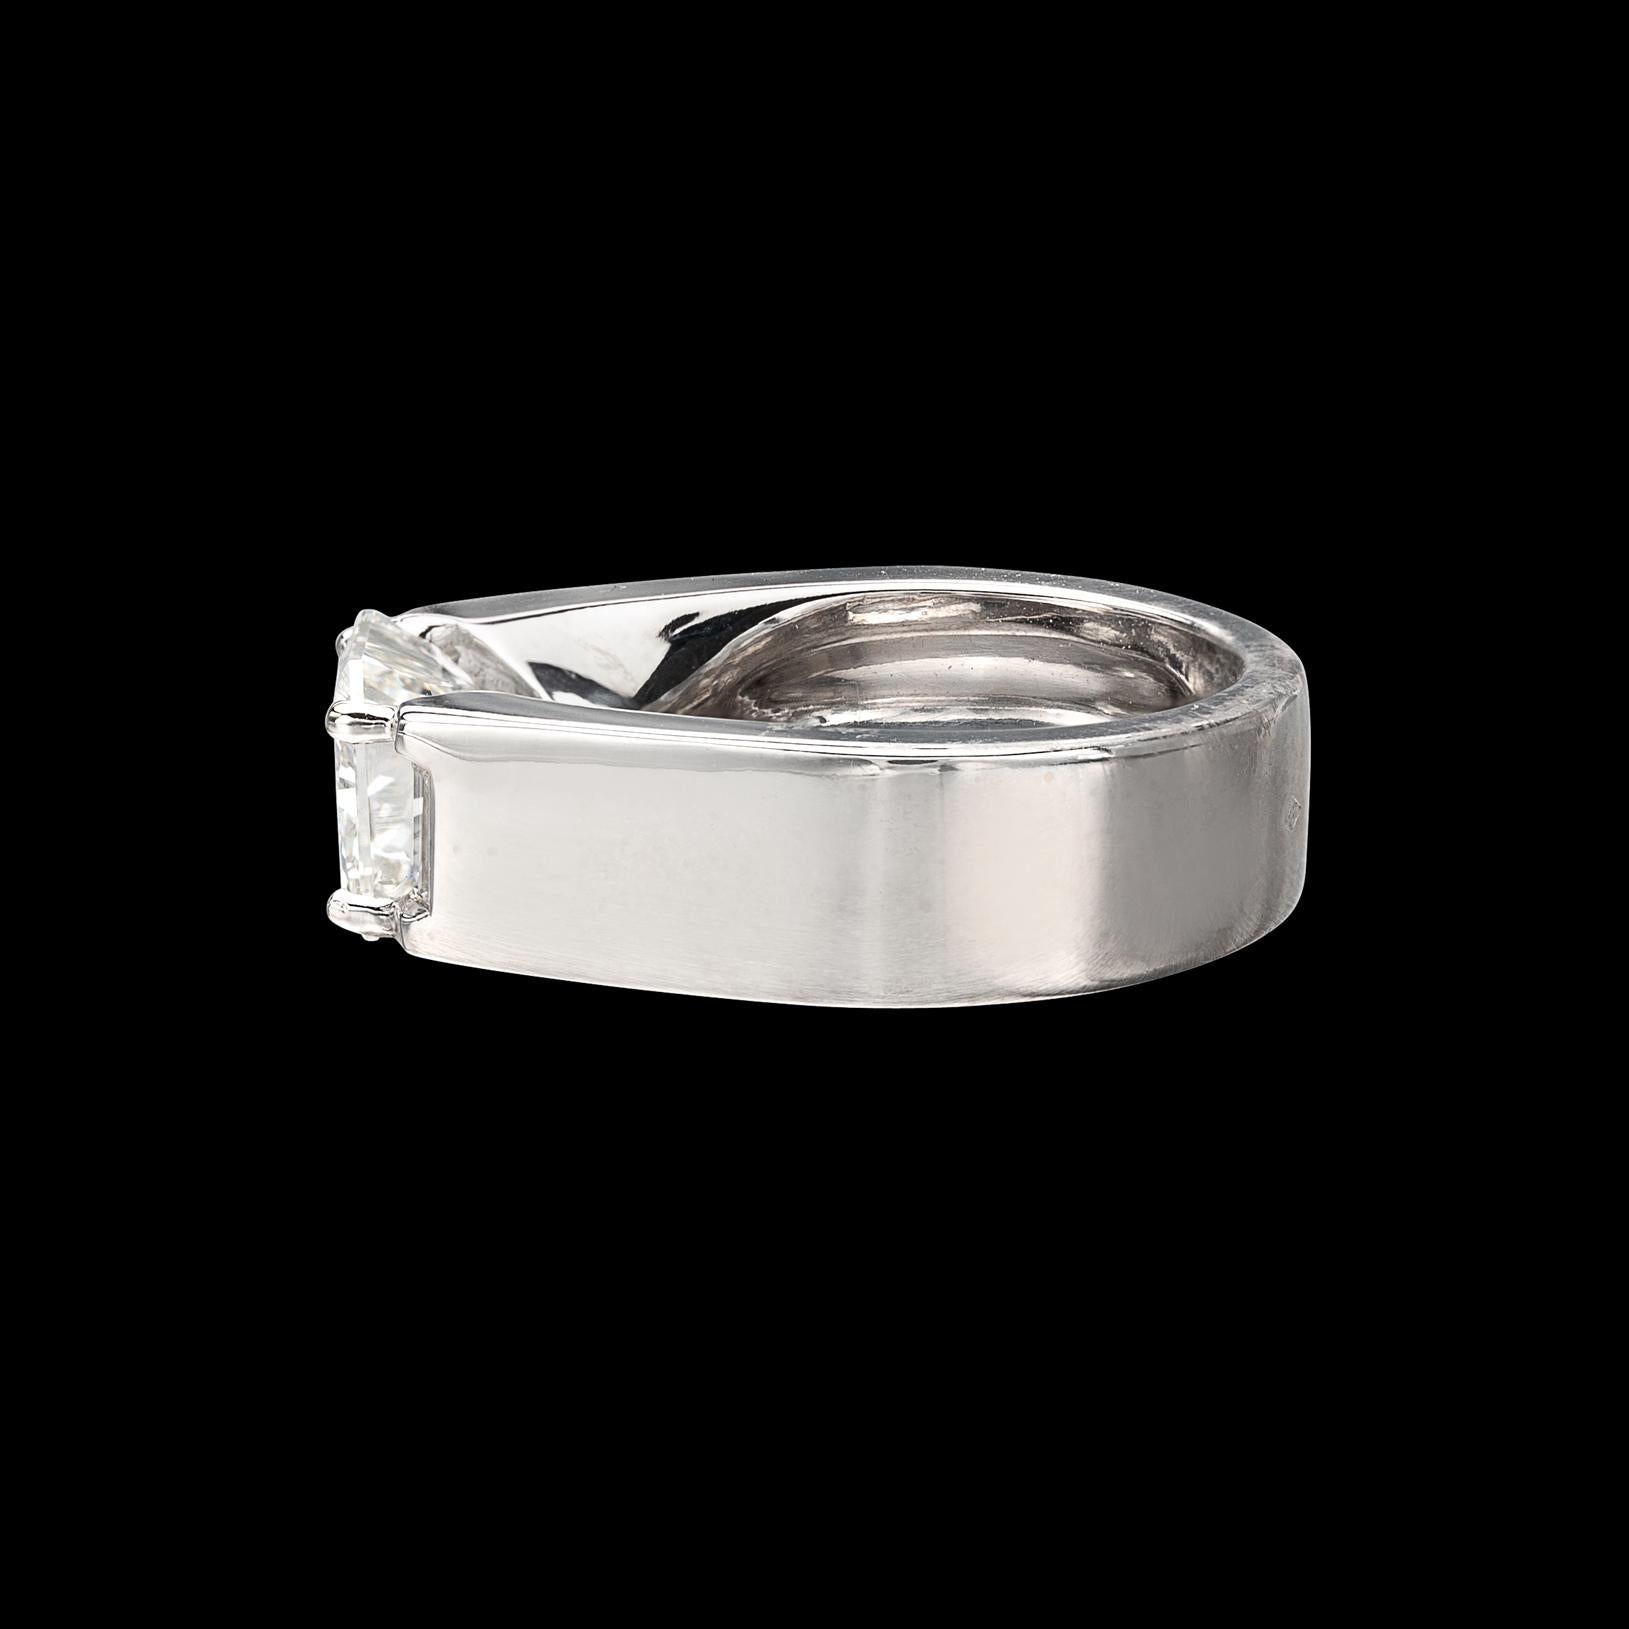 GIA 3.01-Ct H/SI1 Radiant Diamond in Cartier Ring 2